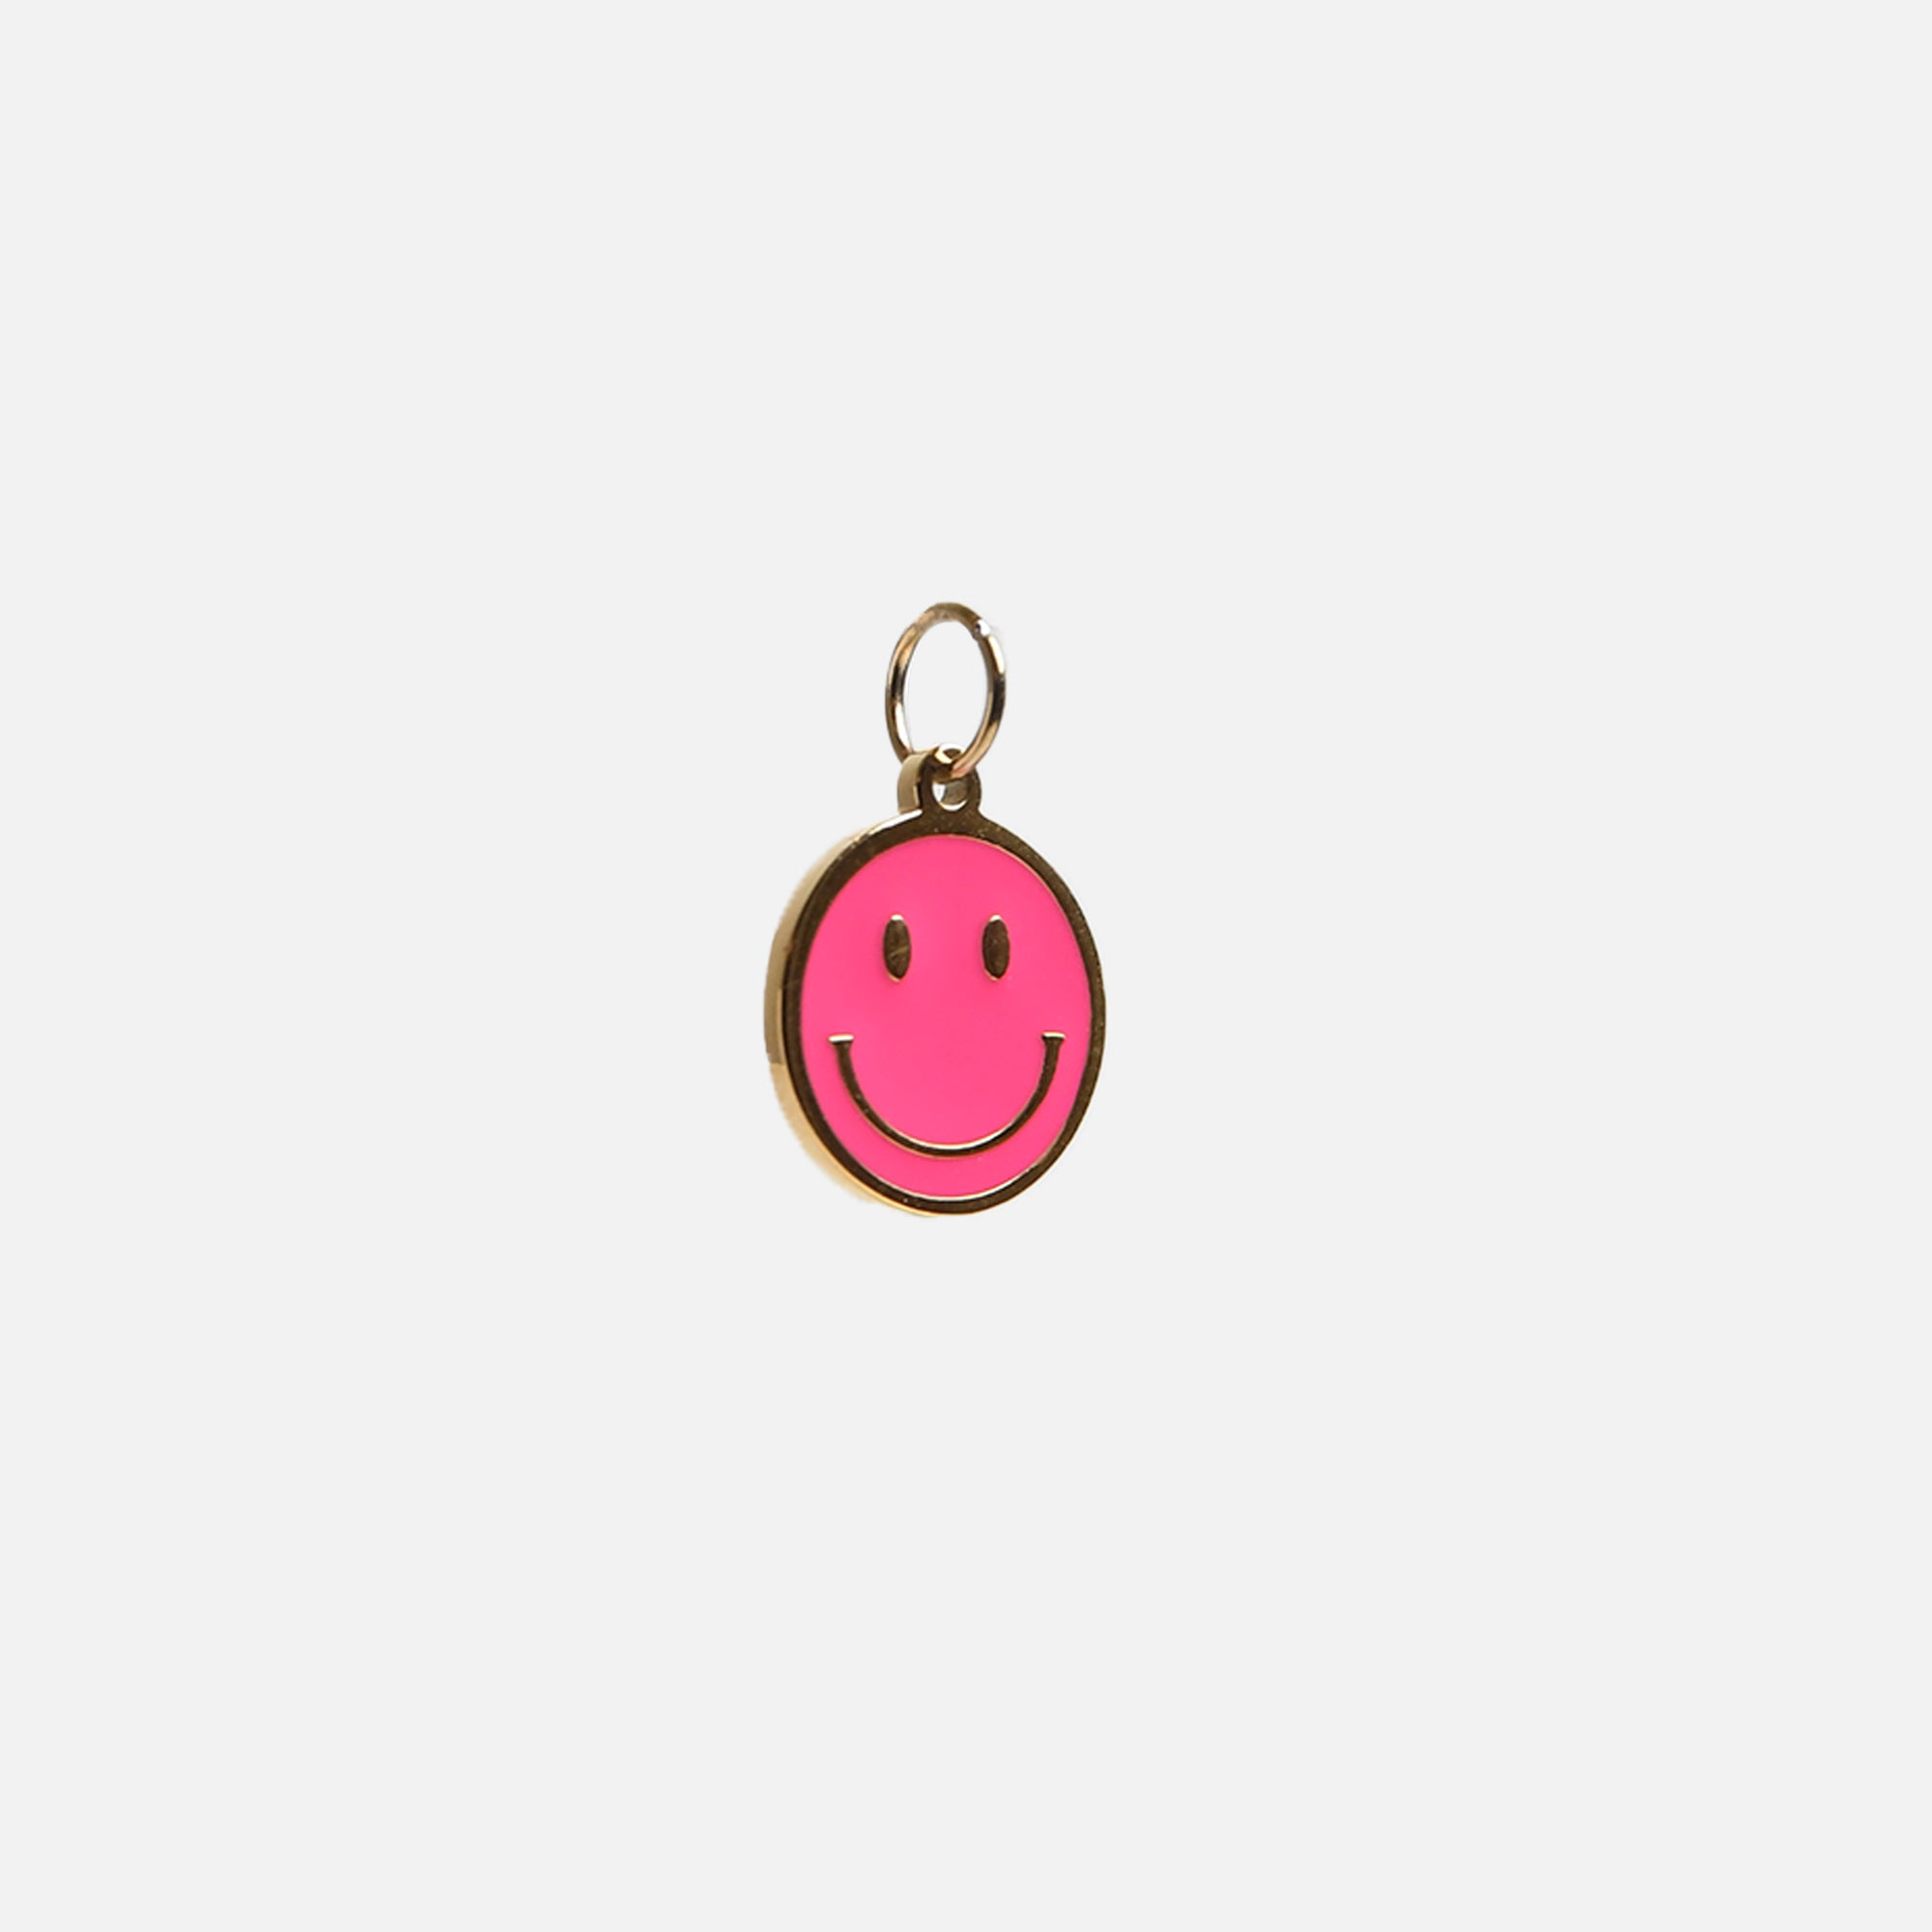 Pink epoxy smiley charm in stainless steel